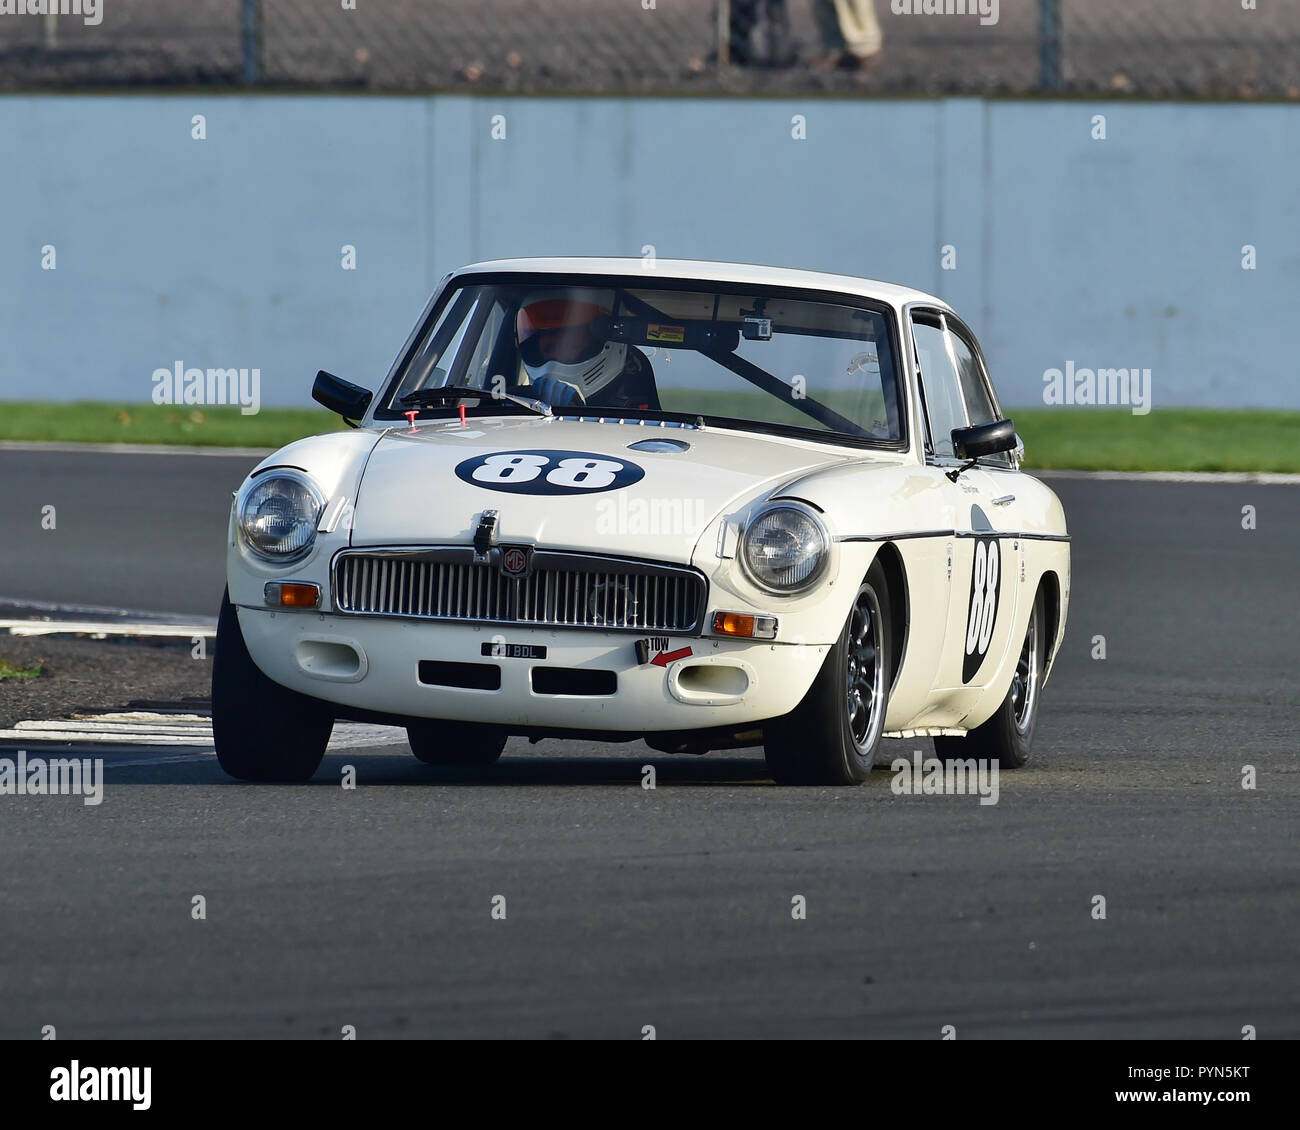 Paul Brown, MGB GT, Historic Road Sports, Silverstone Finals Historic Race Meeting, Silverstone, October 2018, cars, Classic Racing Cars, Historic Rac Stock Photo